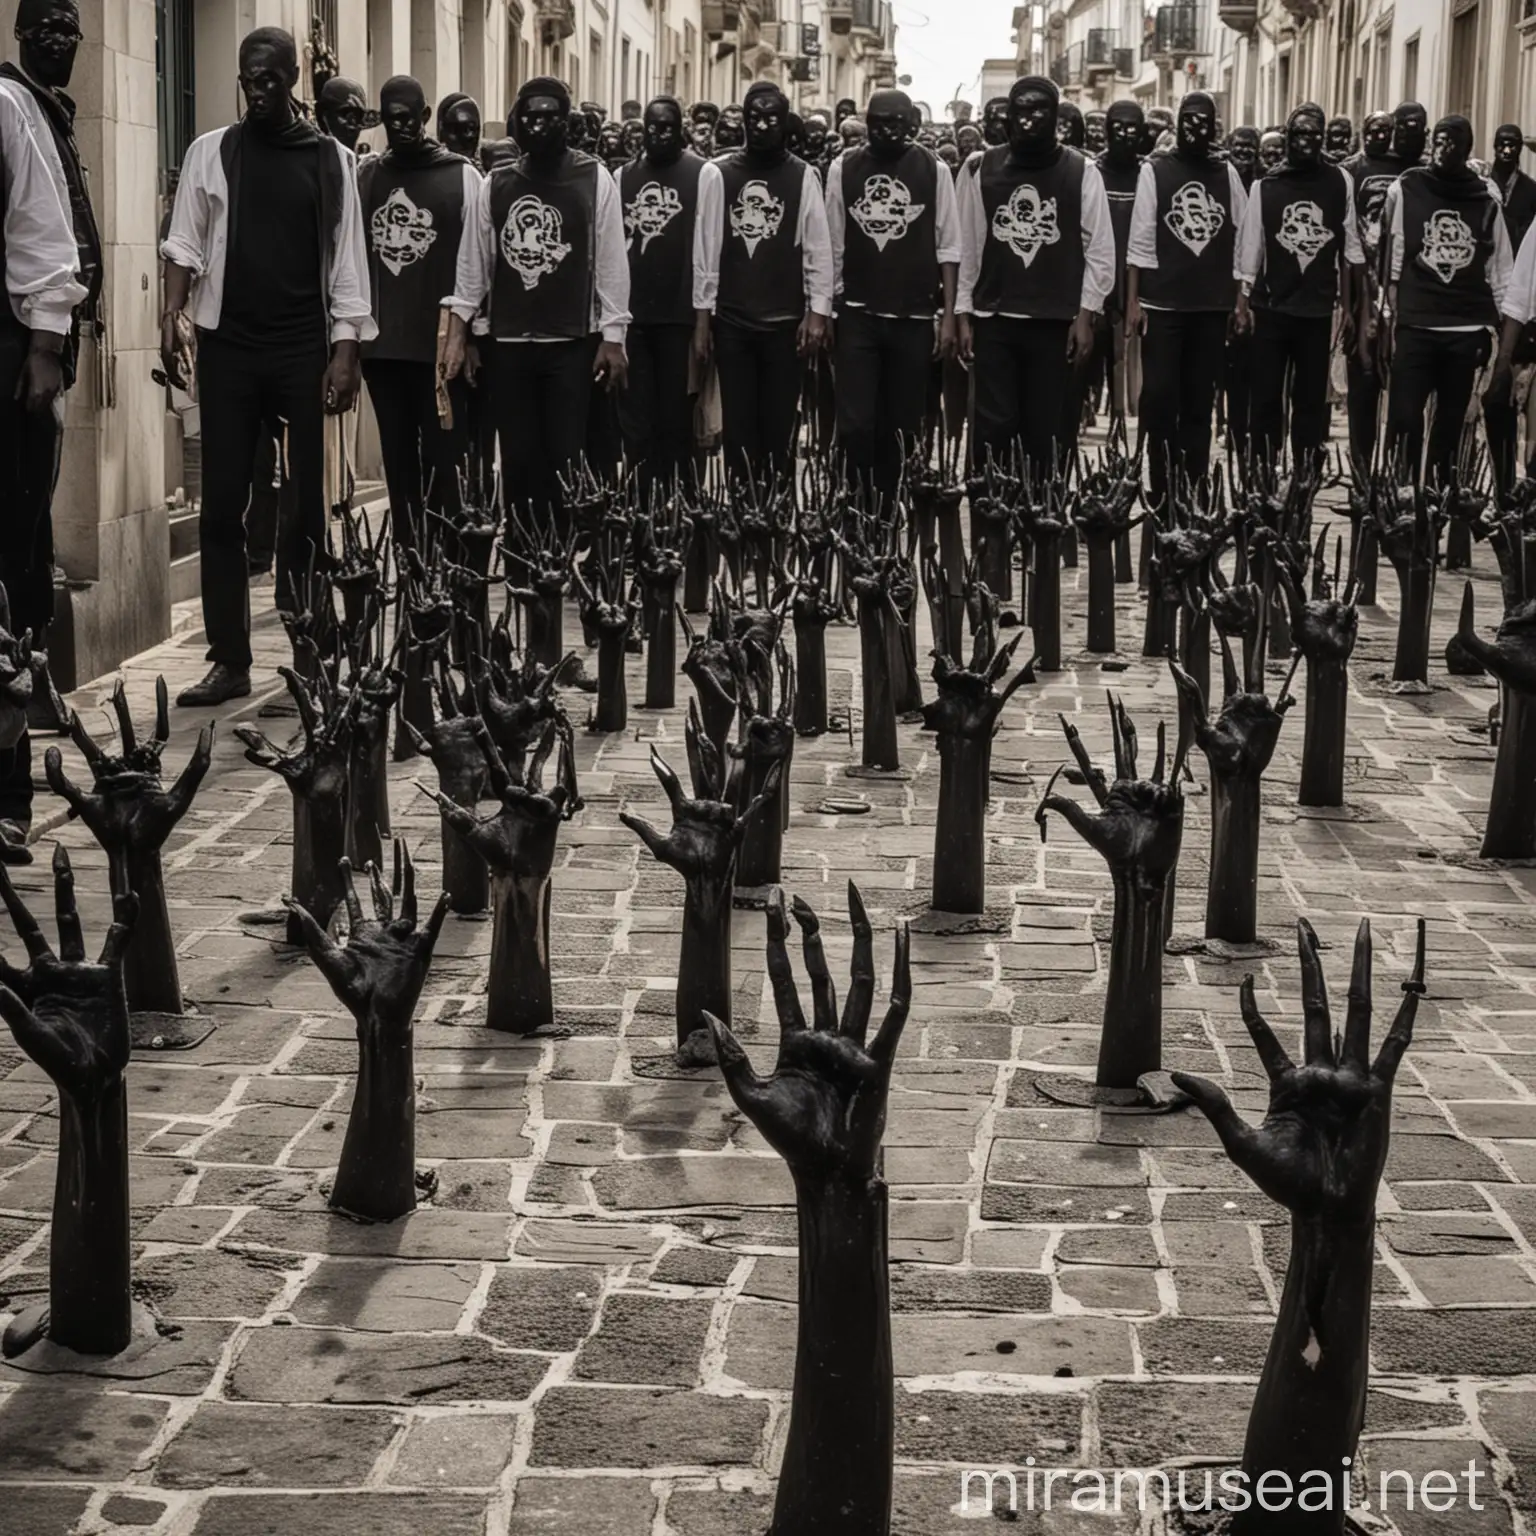 Scene of People with Long Noses and Freemasons in Portugal Streets Occupied by Black Zombies